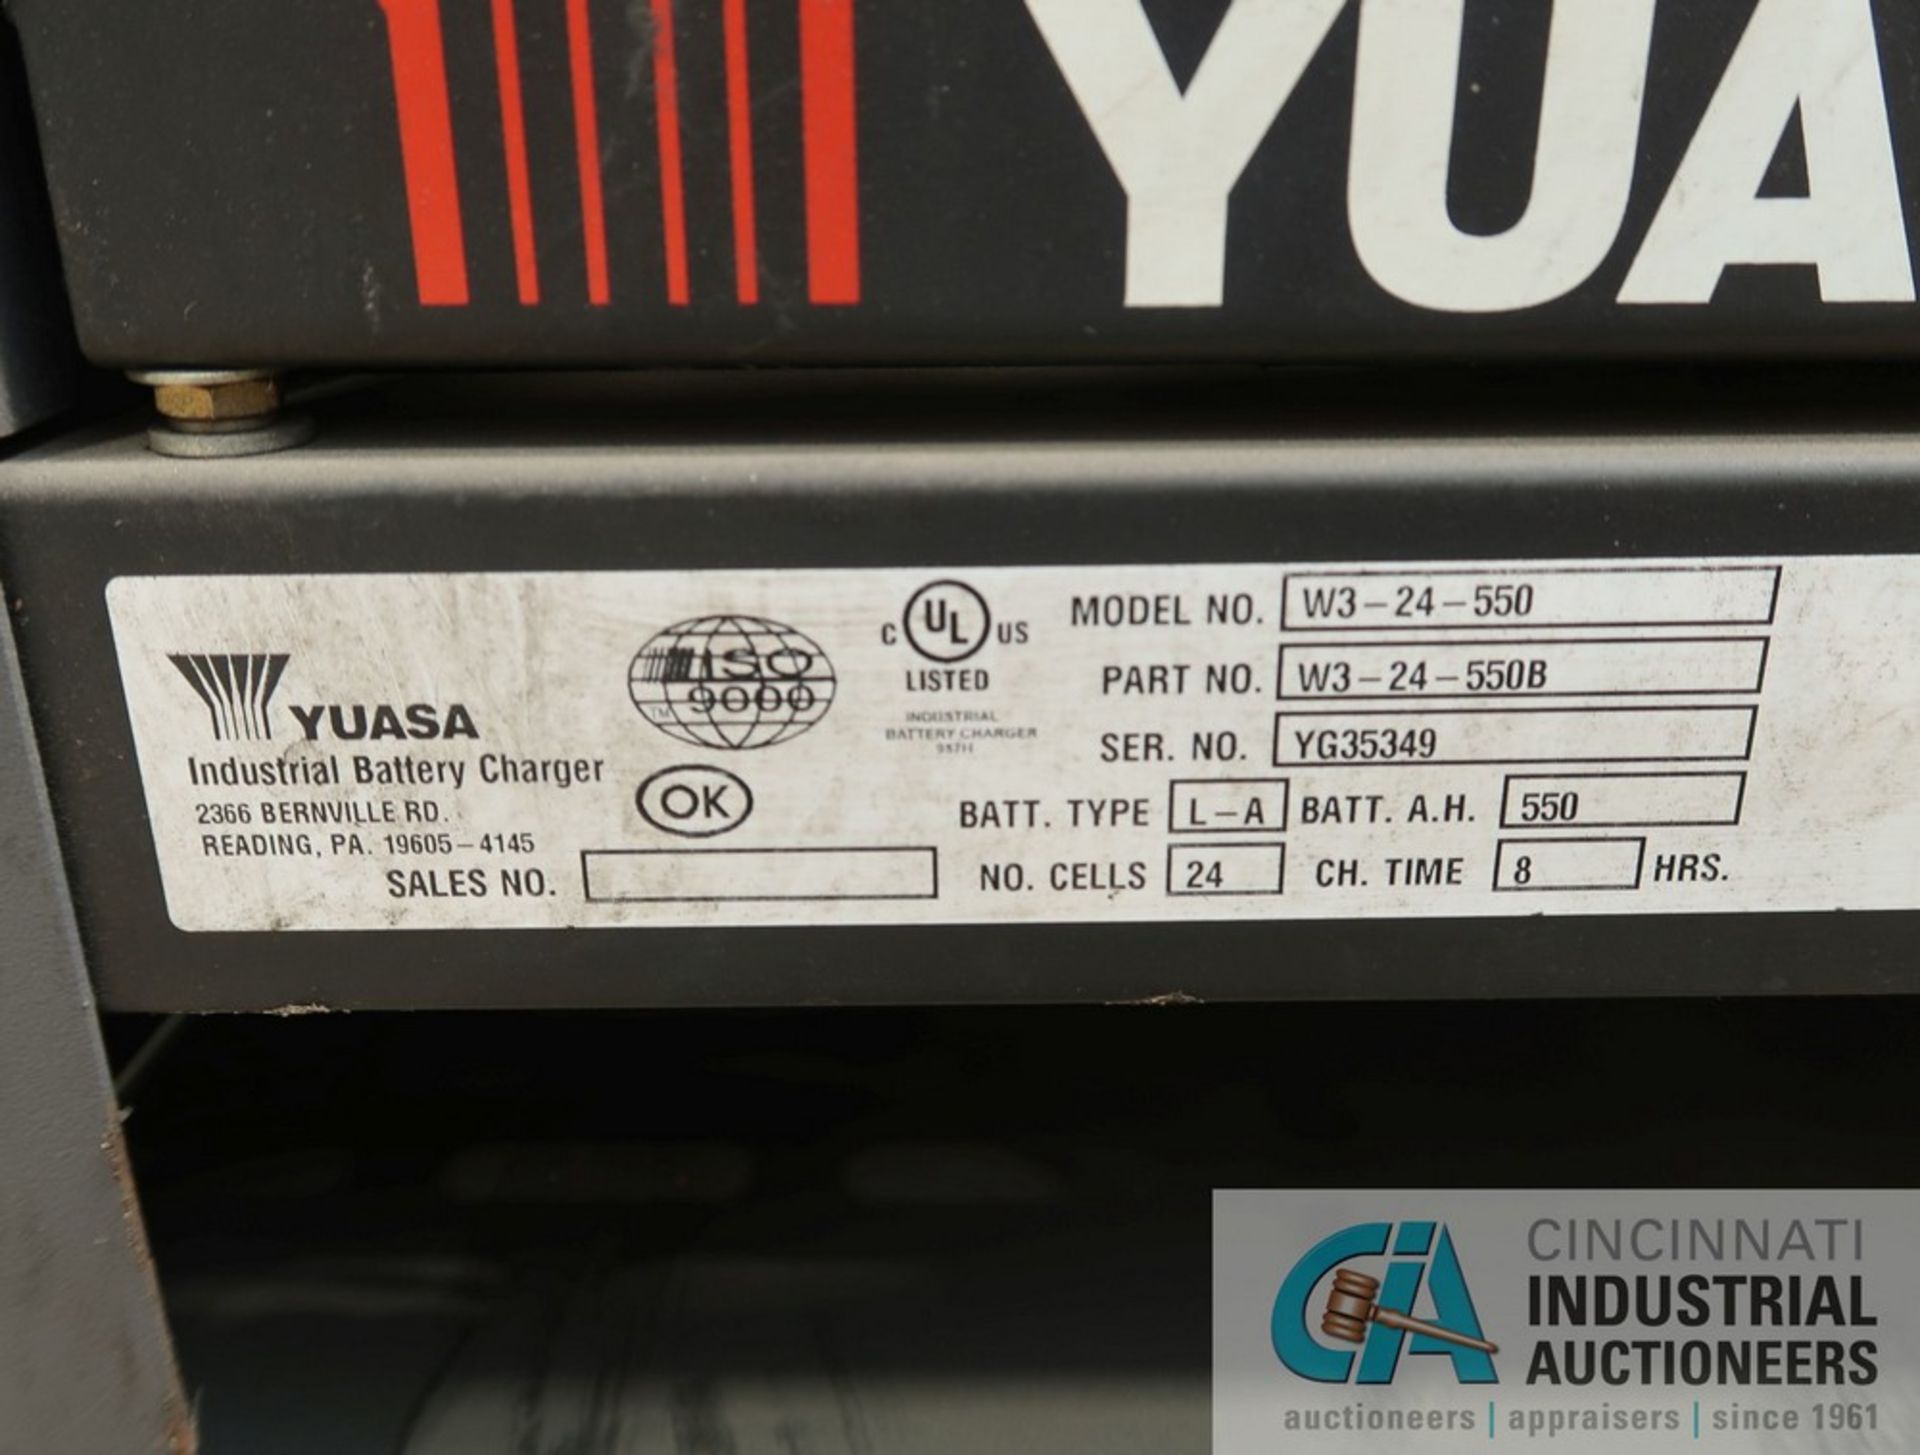 48-VOLT EXIDE MODEL W3-24-550 BATTERY CHARGER; S/N YG35349, 3-PHASE, 48 DC VOLTS, 480 AC VOLTS - Image 5 of 6